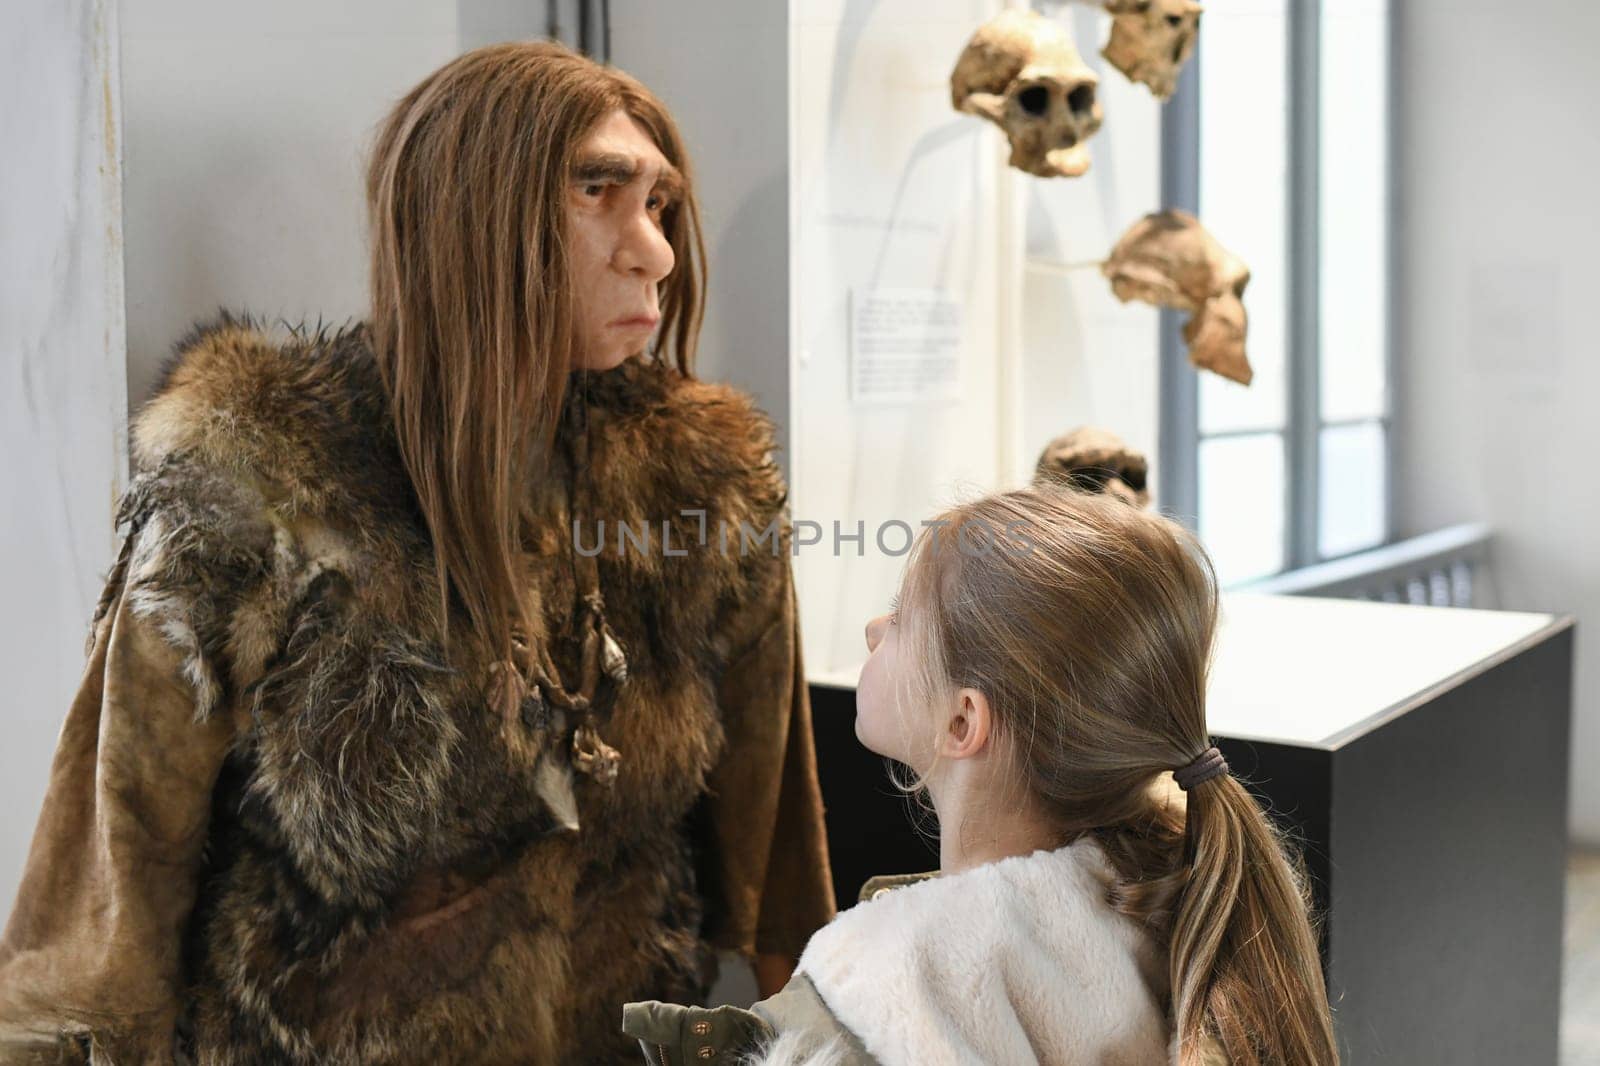 The girl looks at wax figure of a Neanderthal with long hair in skins by Godi